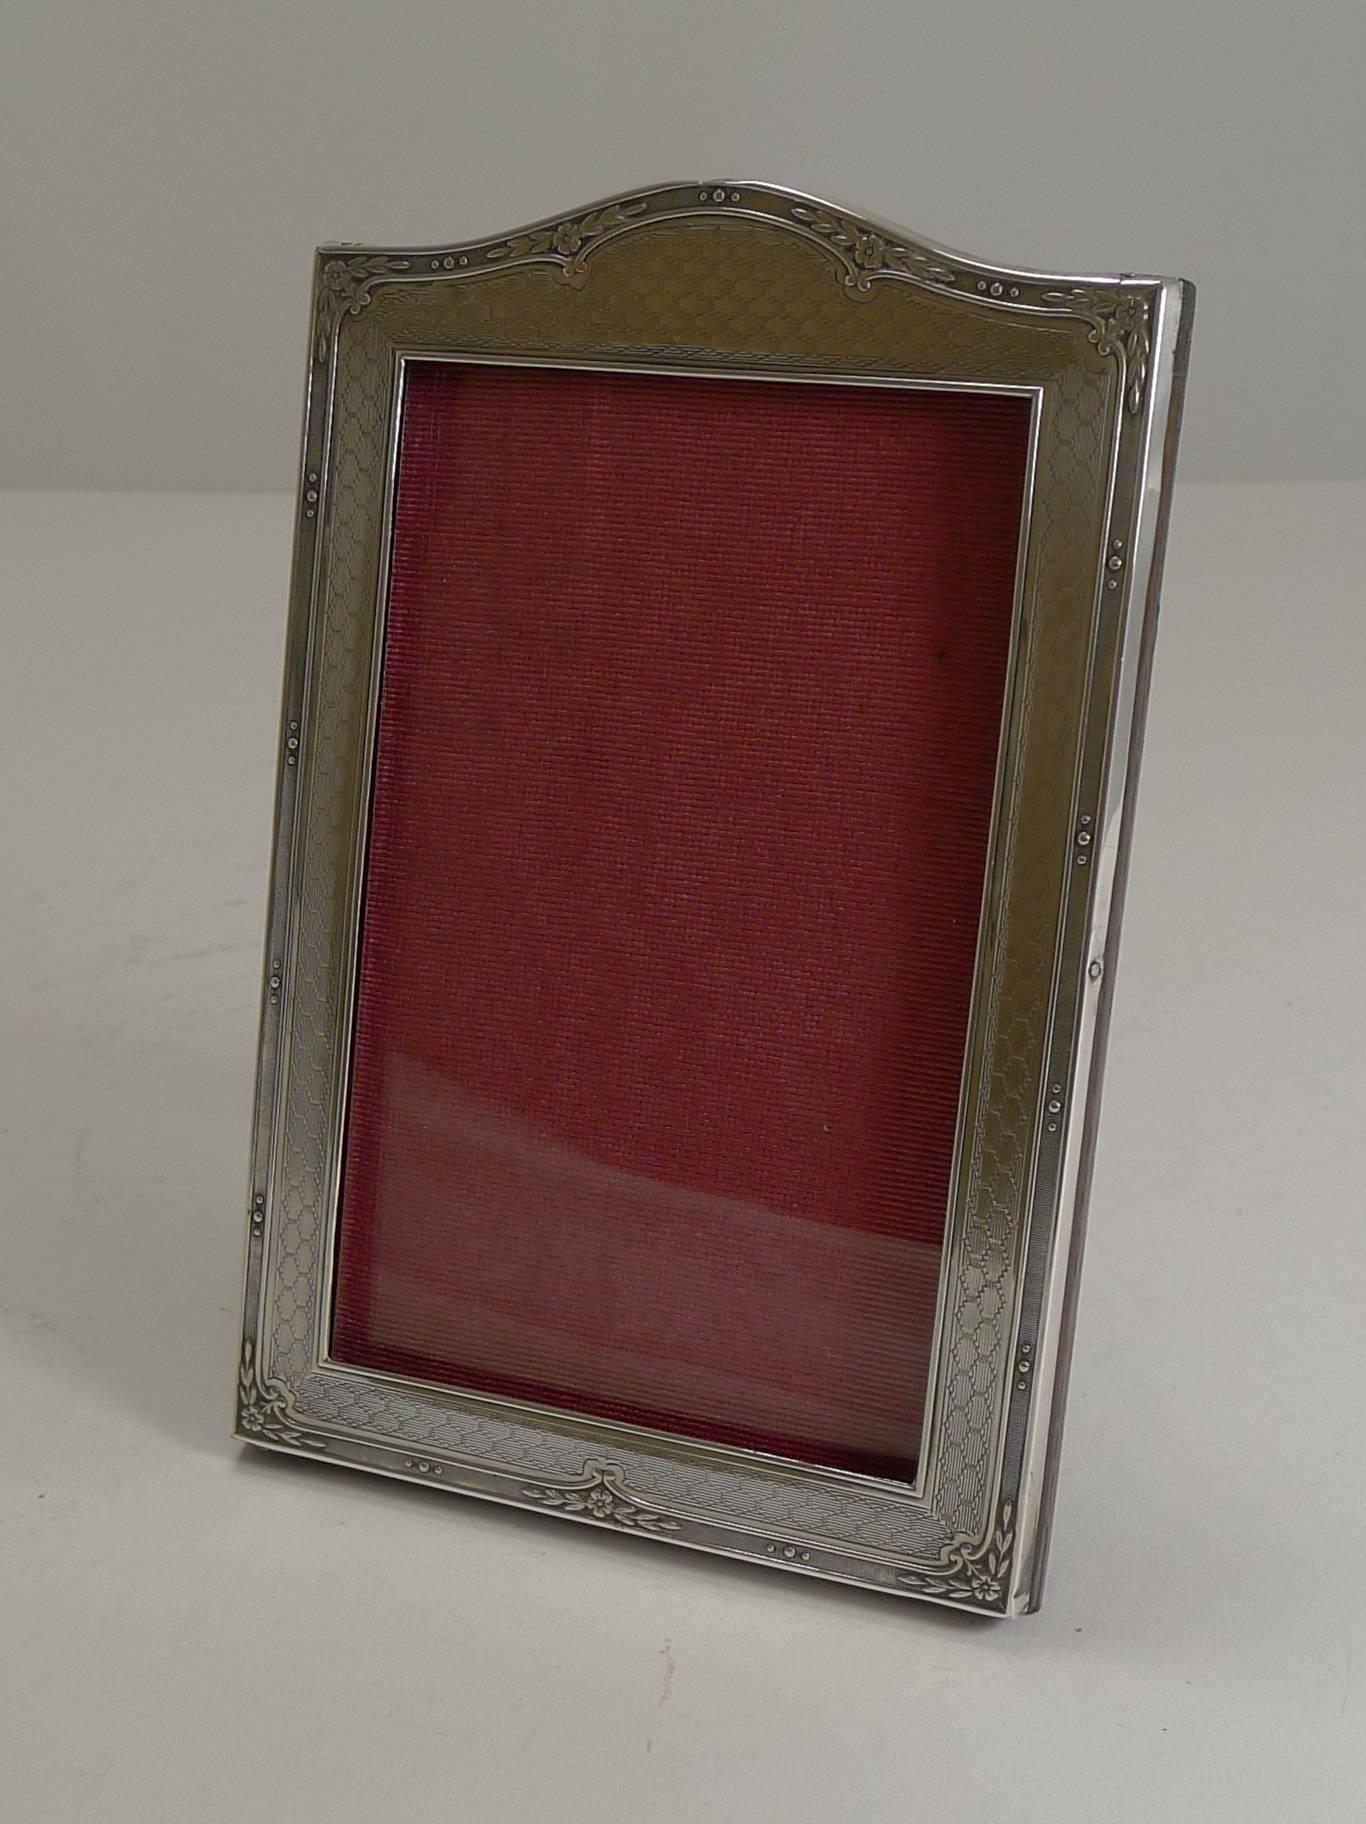 Pretty as a picture, this lovely English photograph frame is made from English sterling silver with a solid English oak backing complete with a folding easel back stand.

The silver incorporates engine turned decoration and pretty floral and